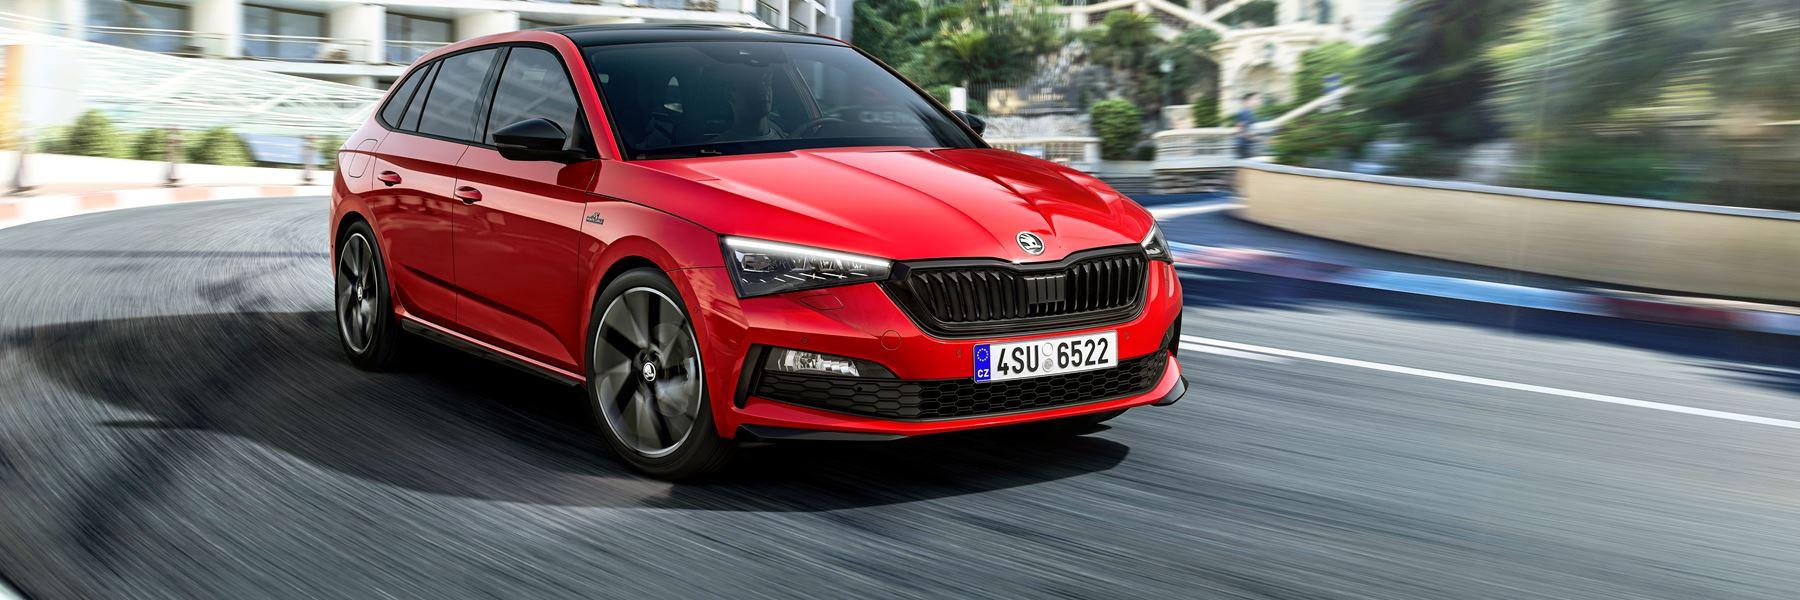 Skoda Scala Buyers Guide: Find Out Why This Hatchback is Right for You